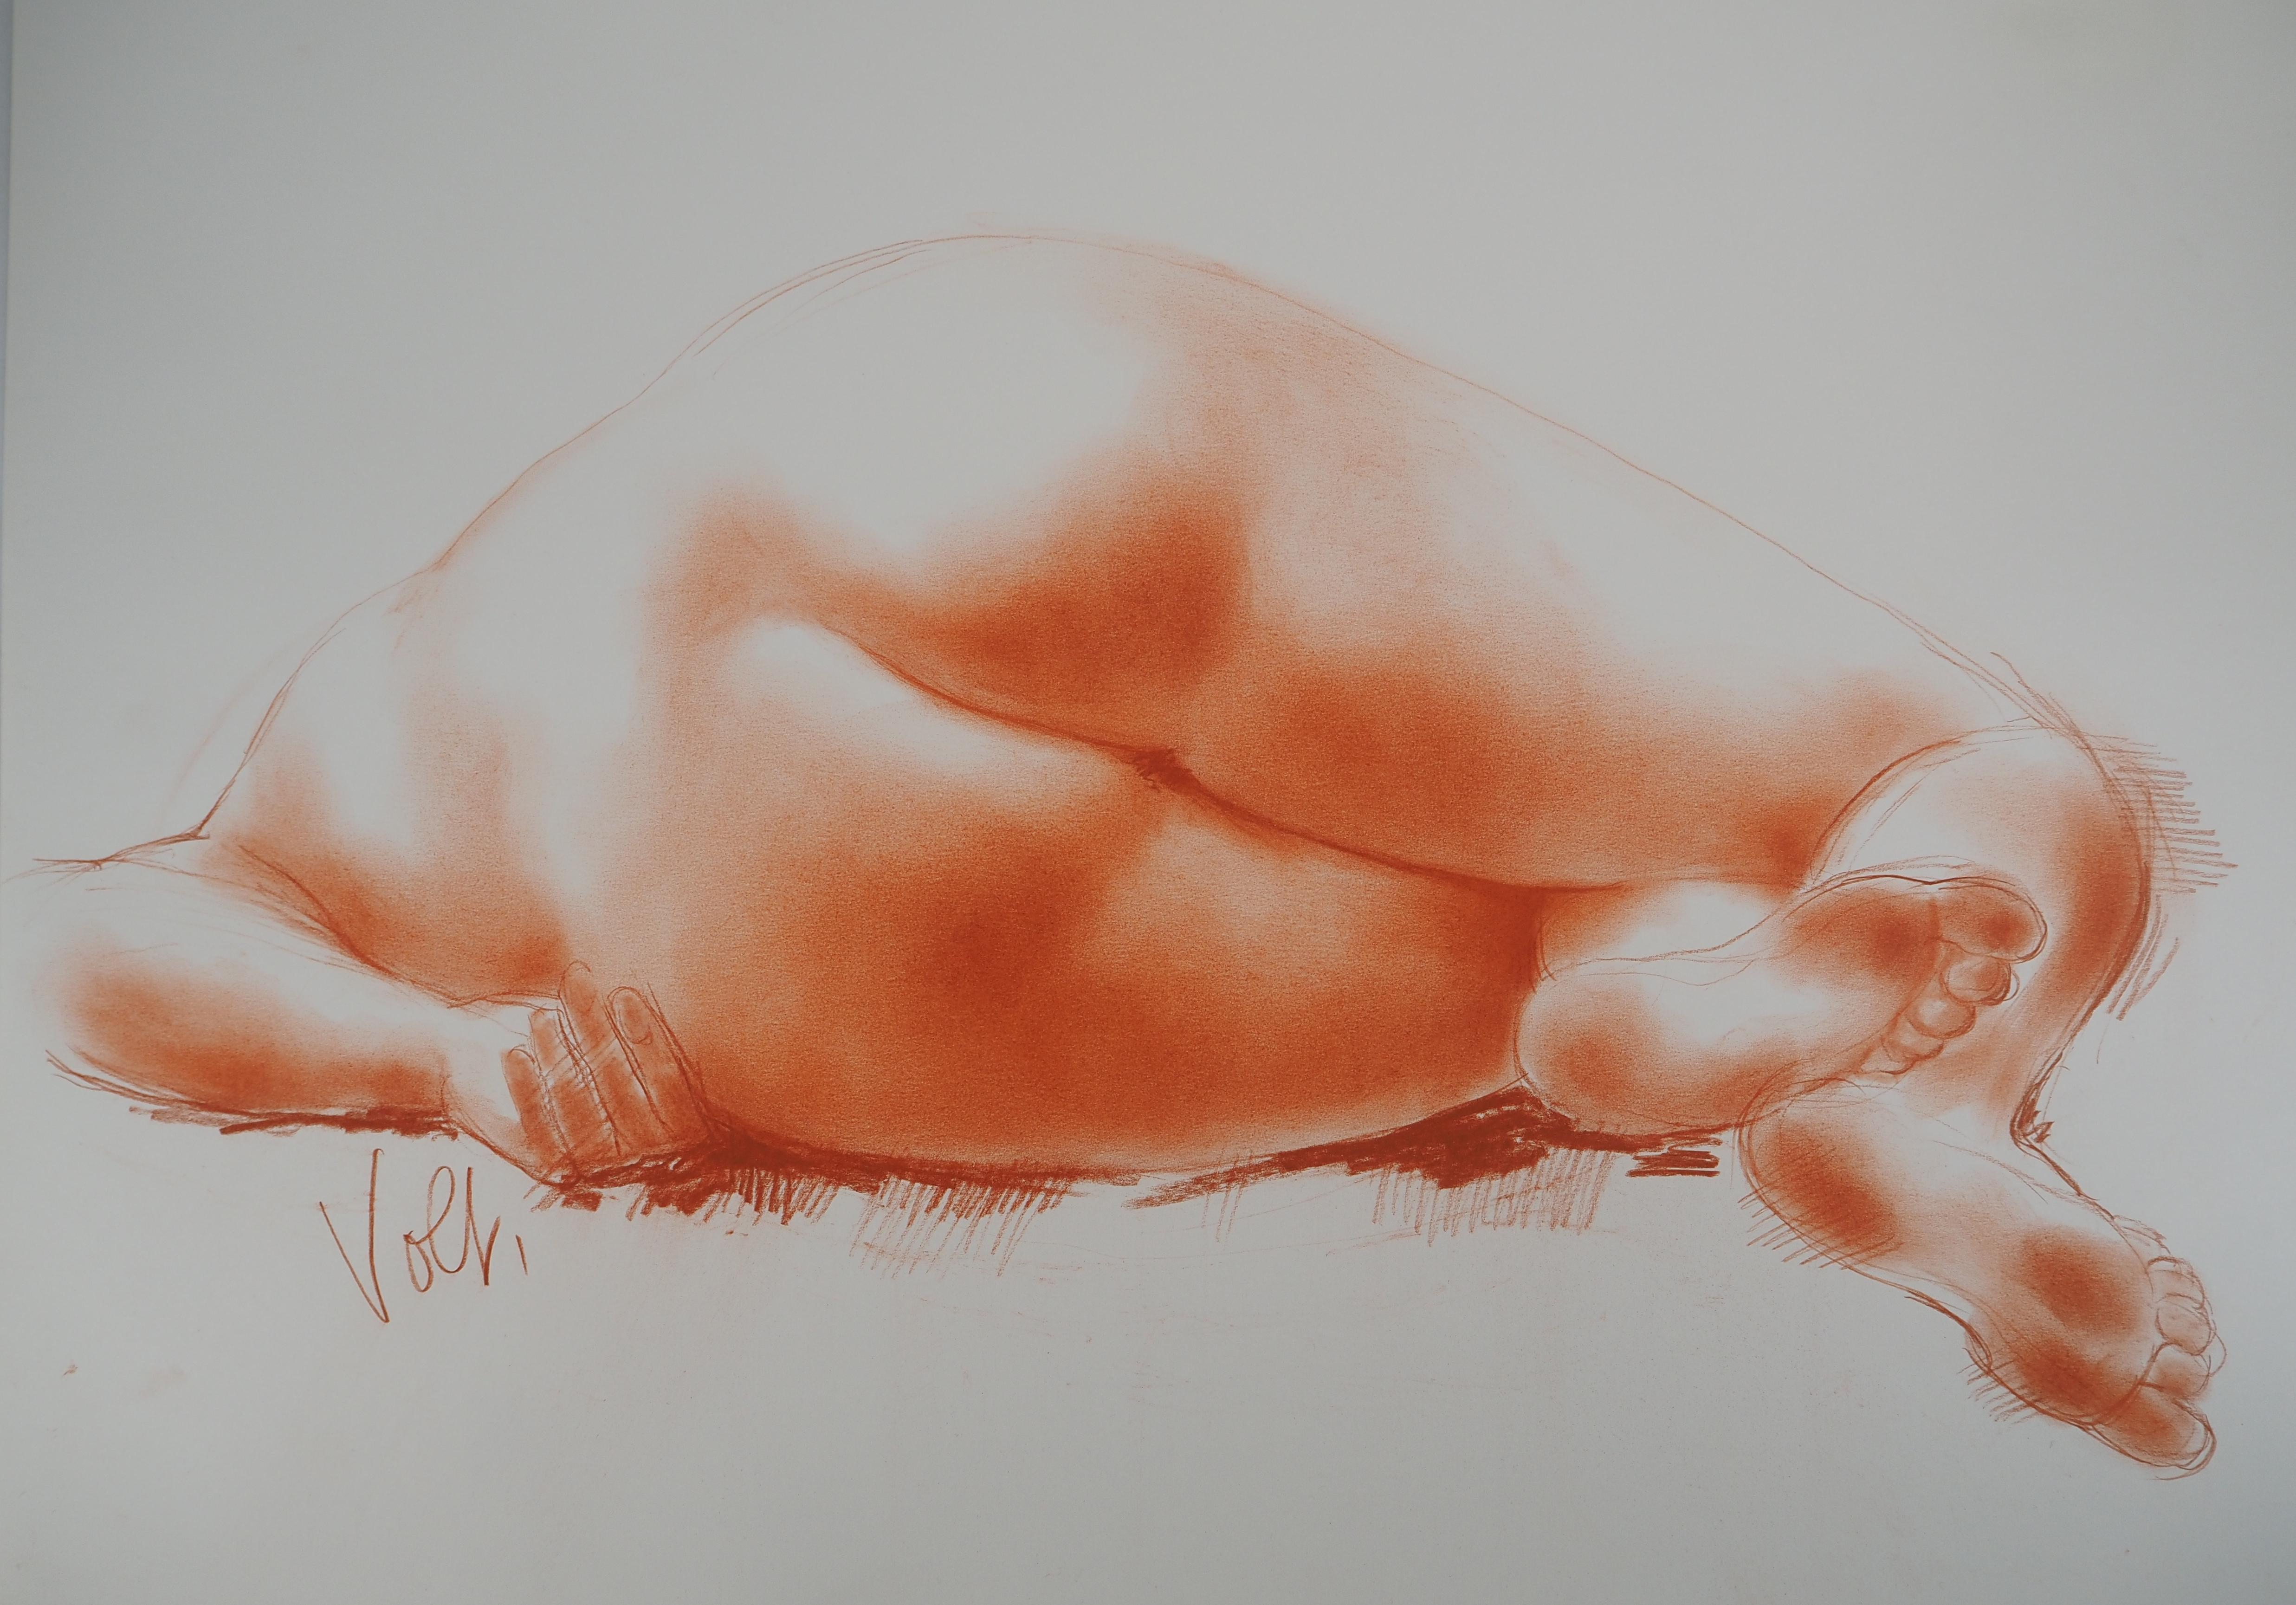 Antoniucci VOLTI
Reclining Nude

Original drawing in sanguine (charcoal)
Handsigned bottom left
On heavy paper 50 x 65 cm (20 x 26 inch)

Very good condition, small piece on tape on the back that can be seen by transparency at the edge of the sheet